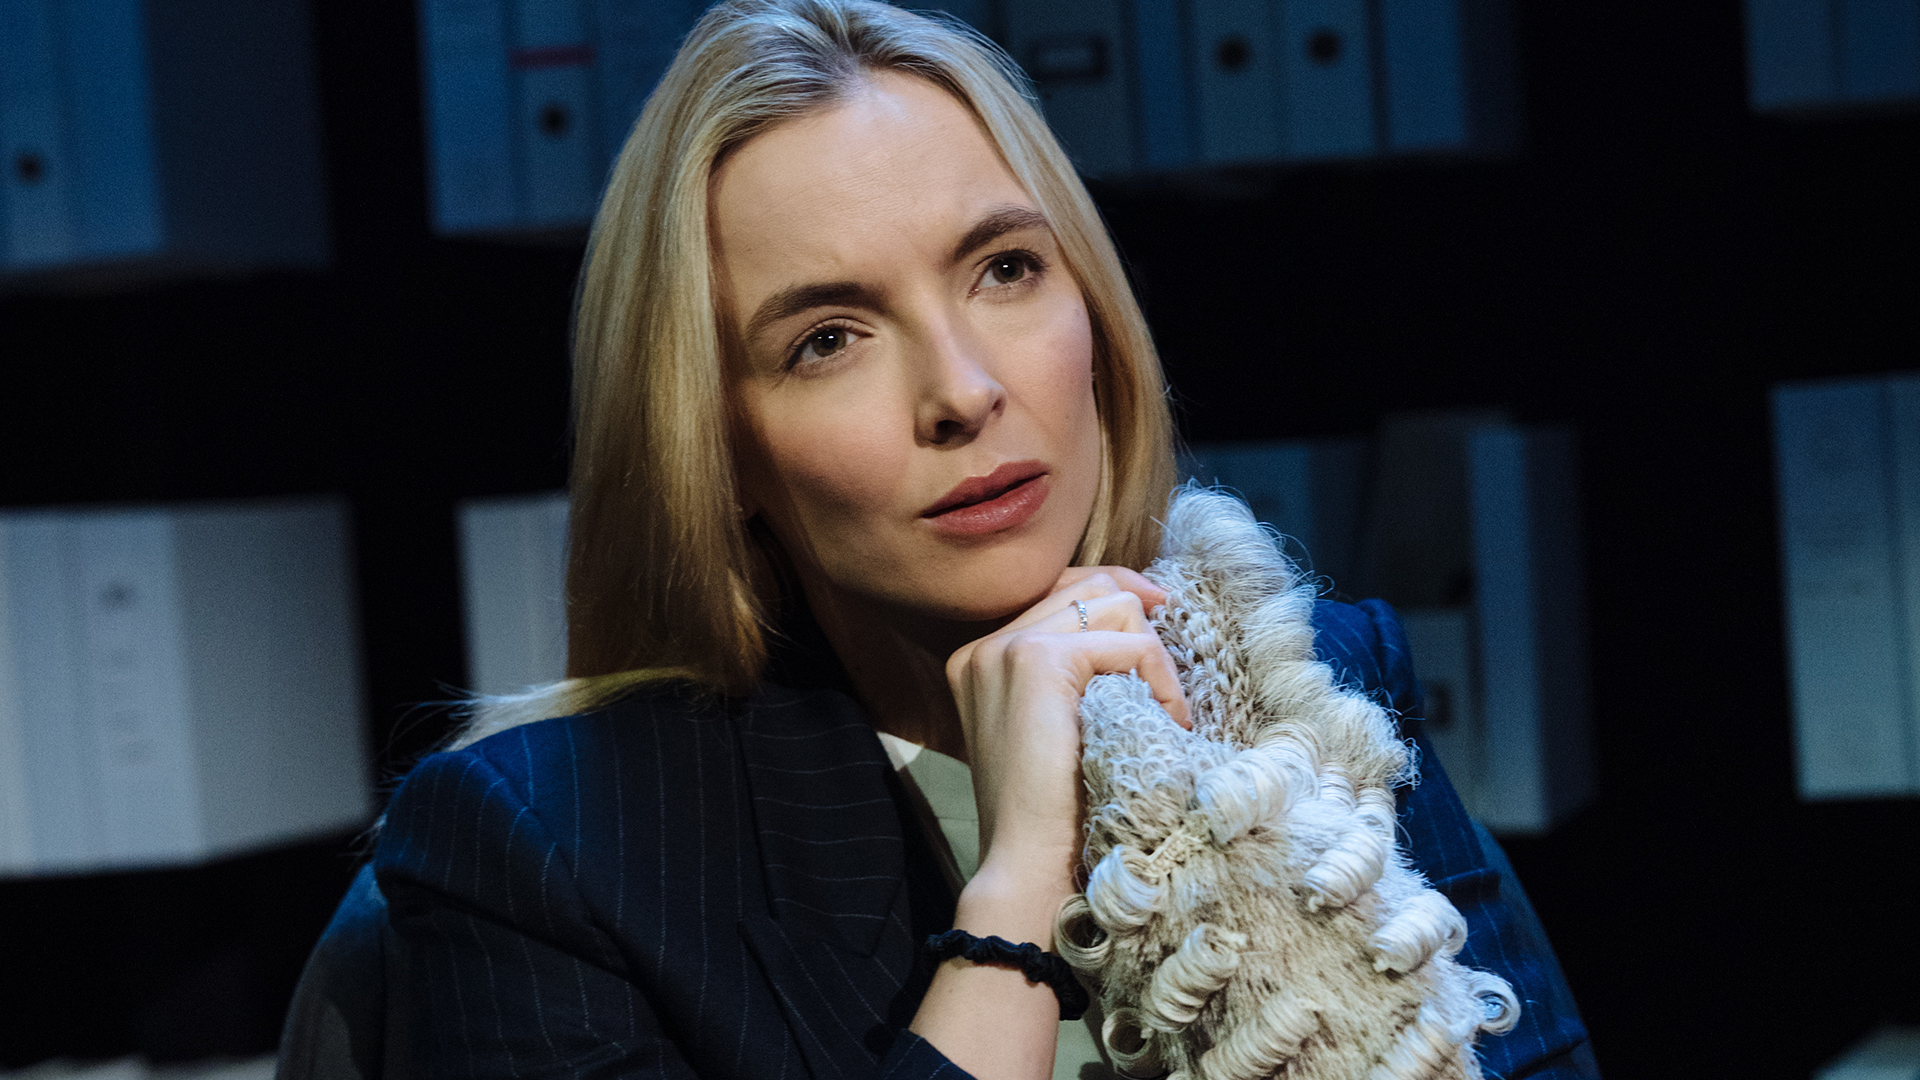 PRIMA FACIE REVIEW: JODIE COMER PROVES HER CHAMELEONIC TALENT ONCE AGAIN